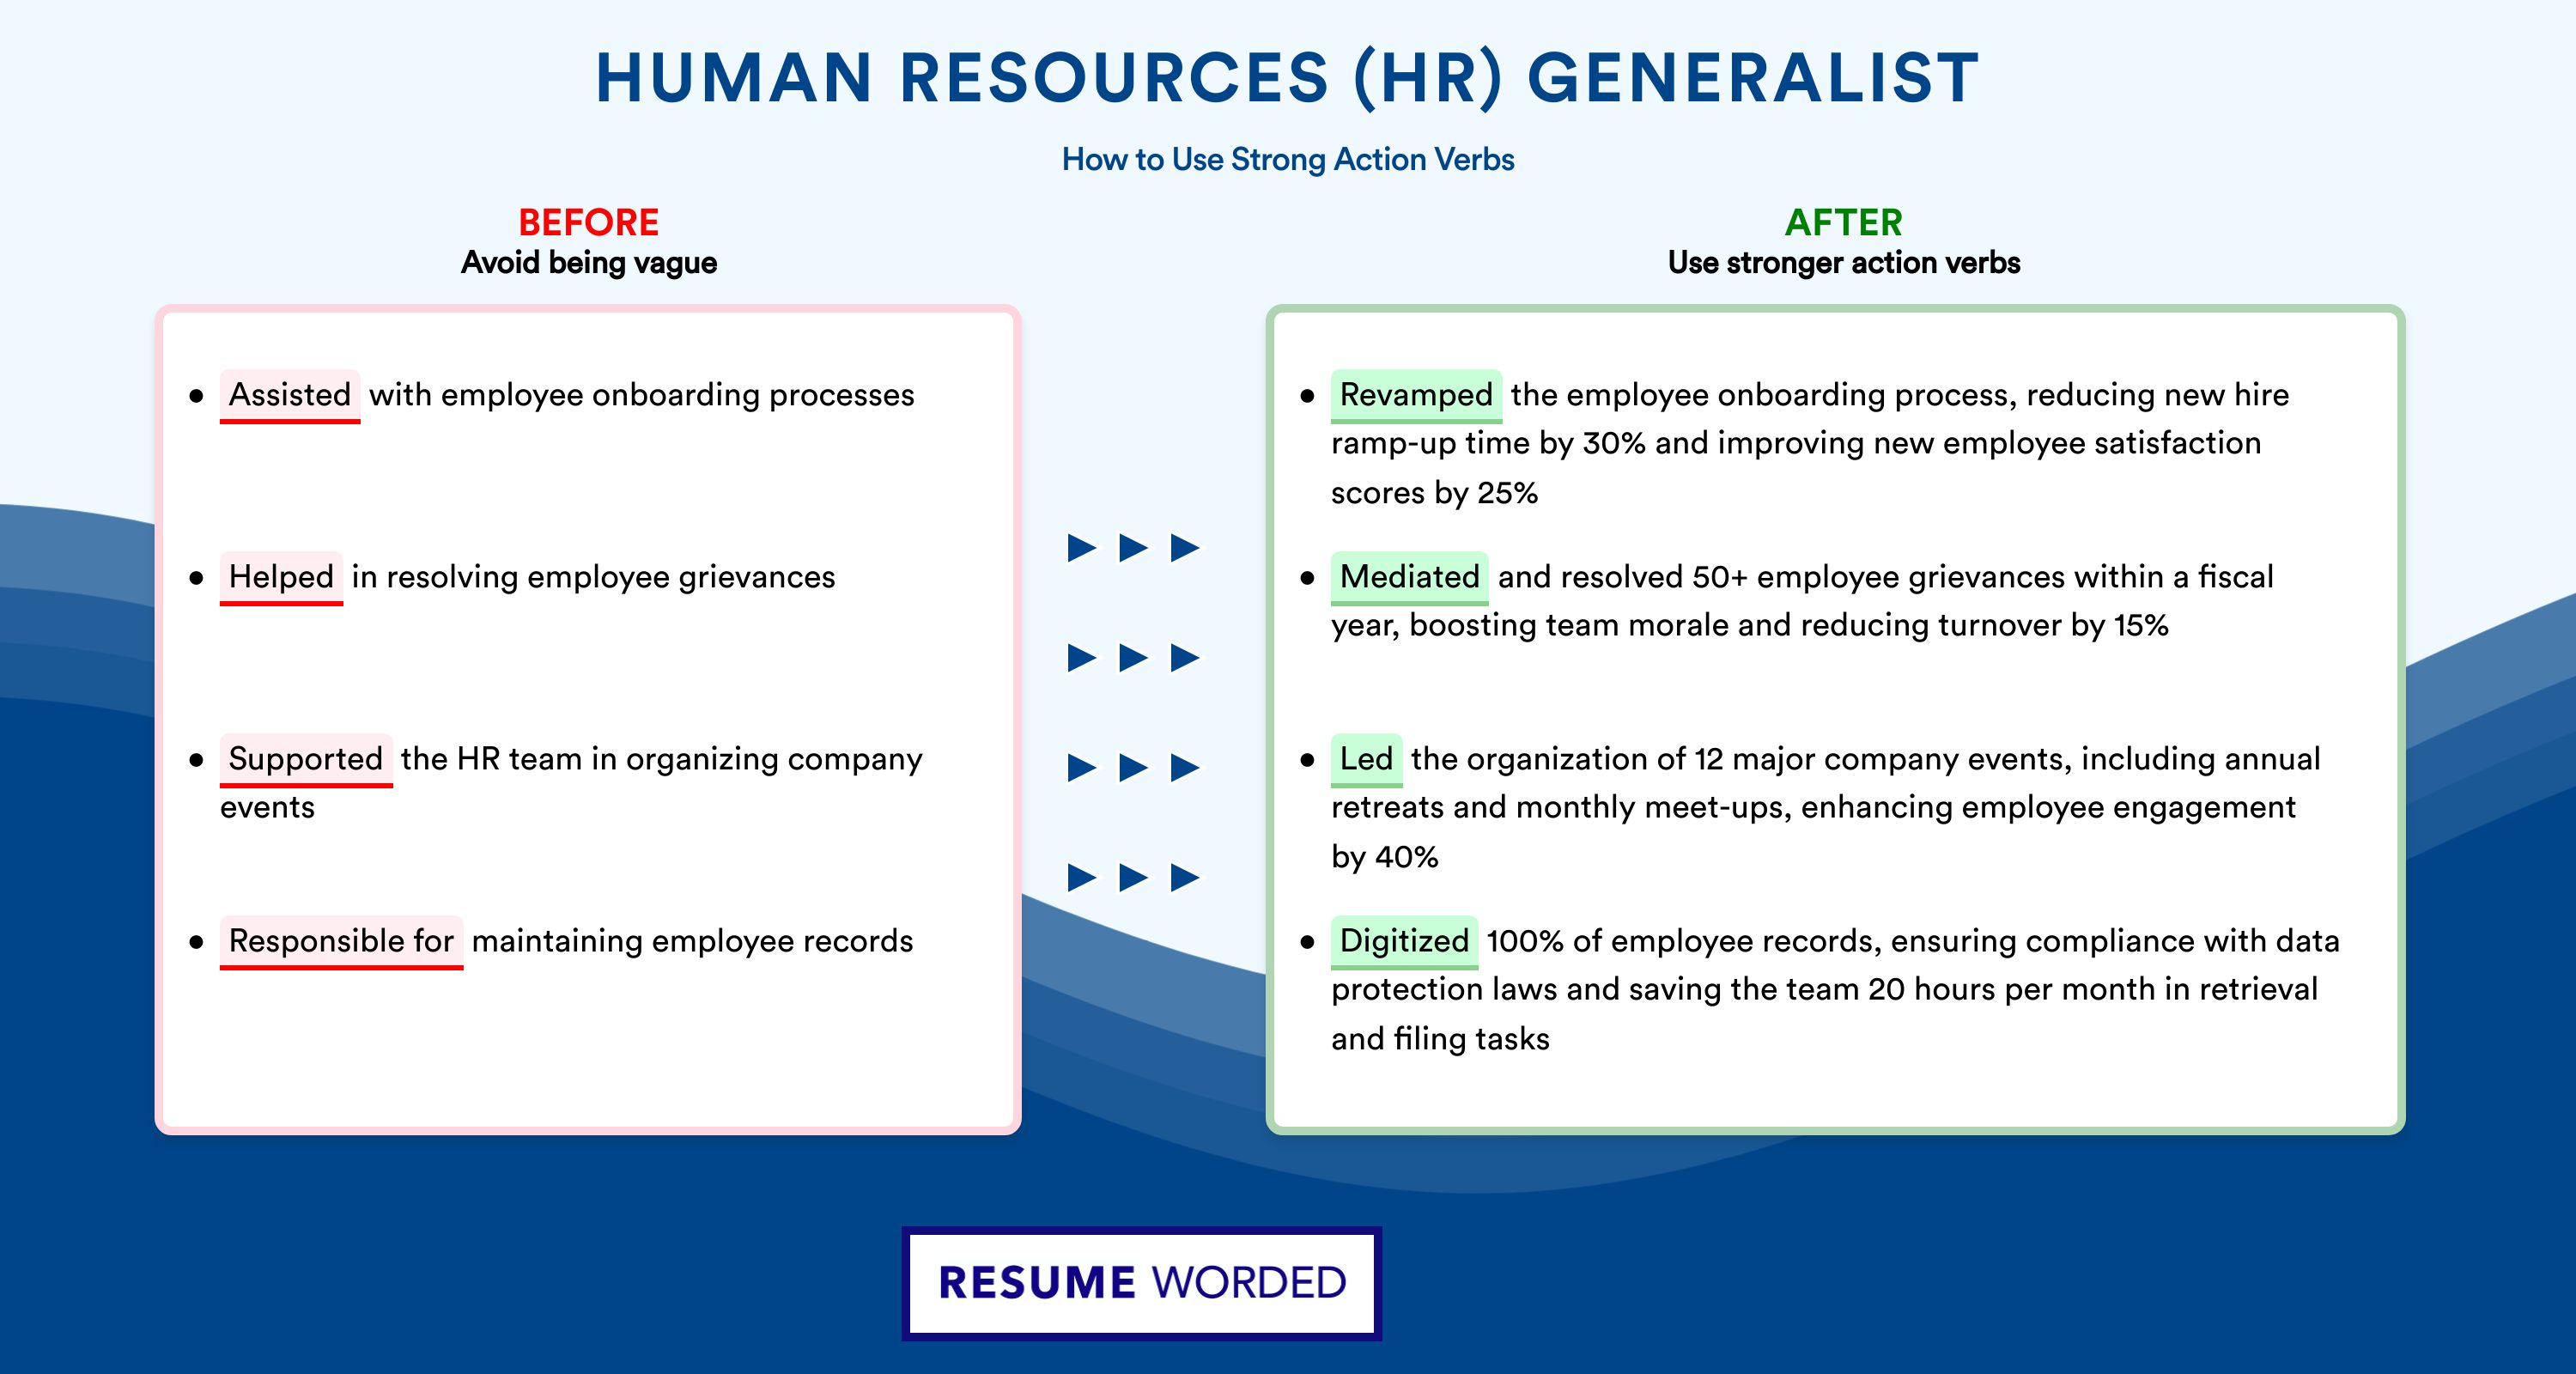 Action Verbs for Human Resources (HR) Generalist